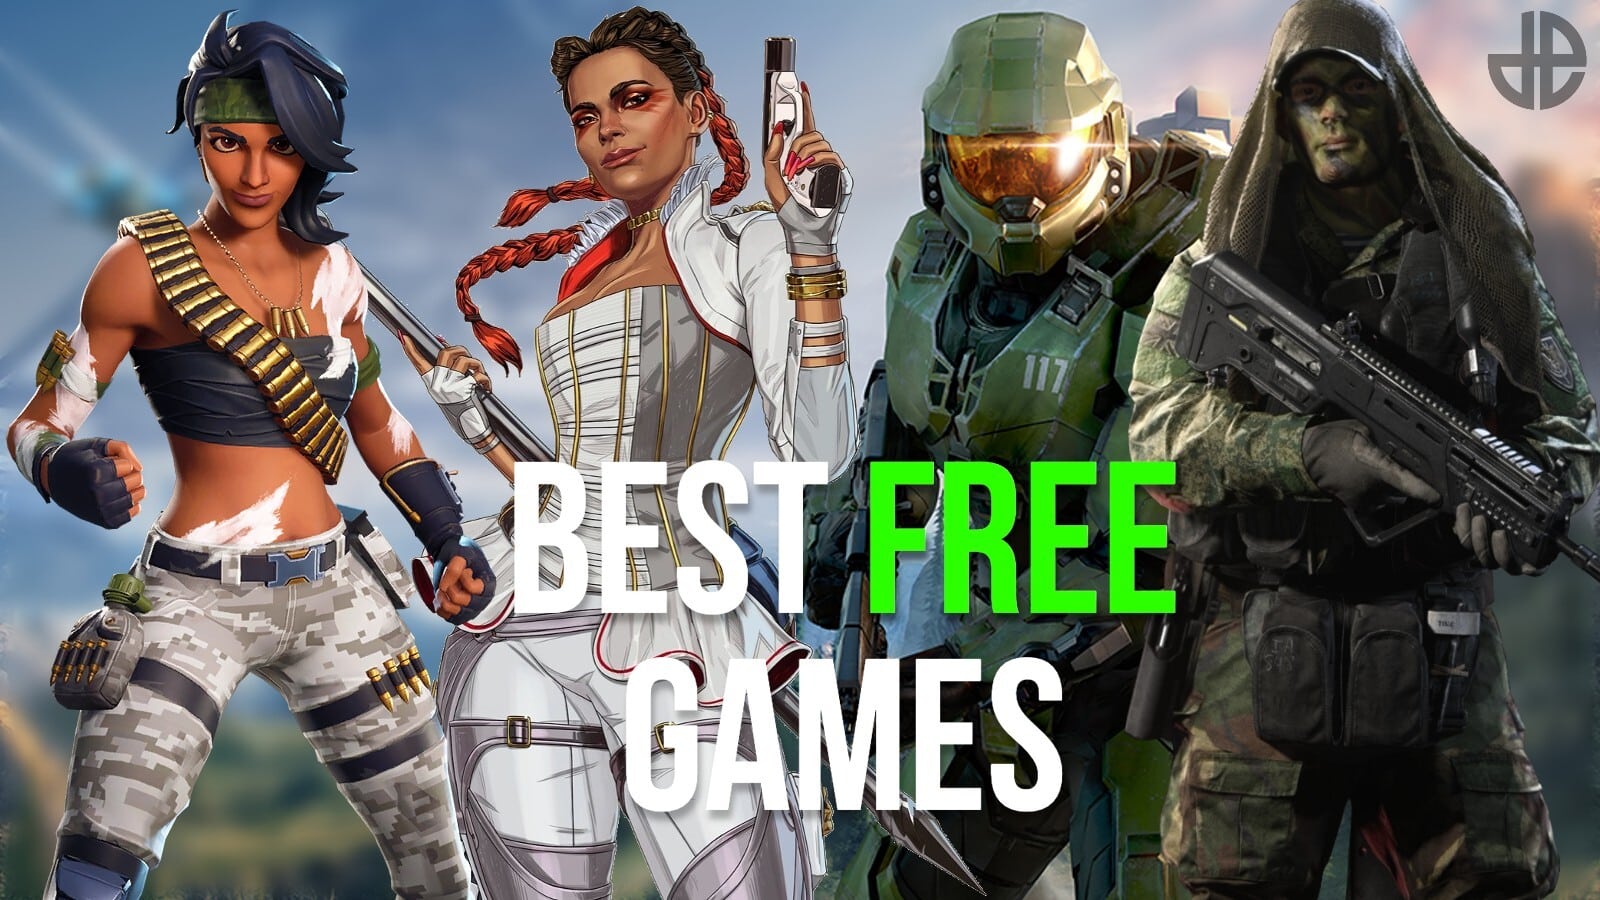 Best free games to download & play on PC, PS5, Xbox, or Nintendo